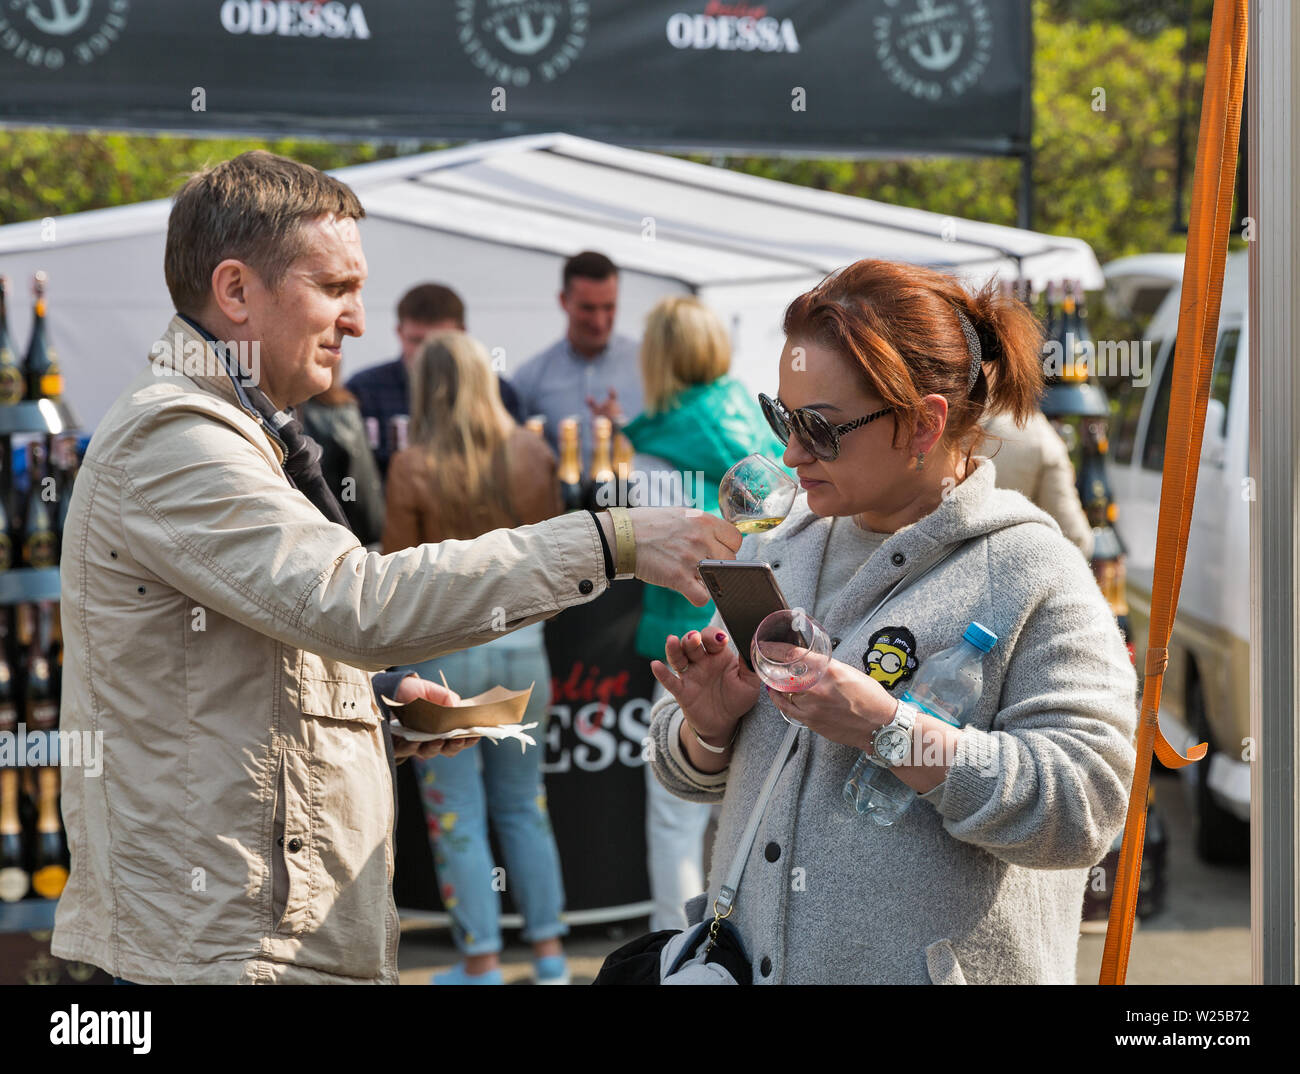 KYIV, UKRAINE - APRIL 21, 2019: People tasting wine during Food and Wine Festival in National Expocenter, a permanent multi-purpose exhibition complex Stock Photo